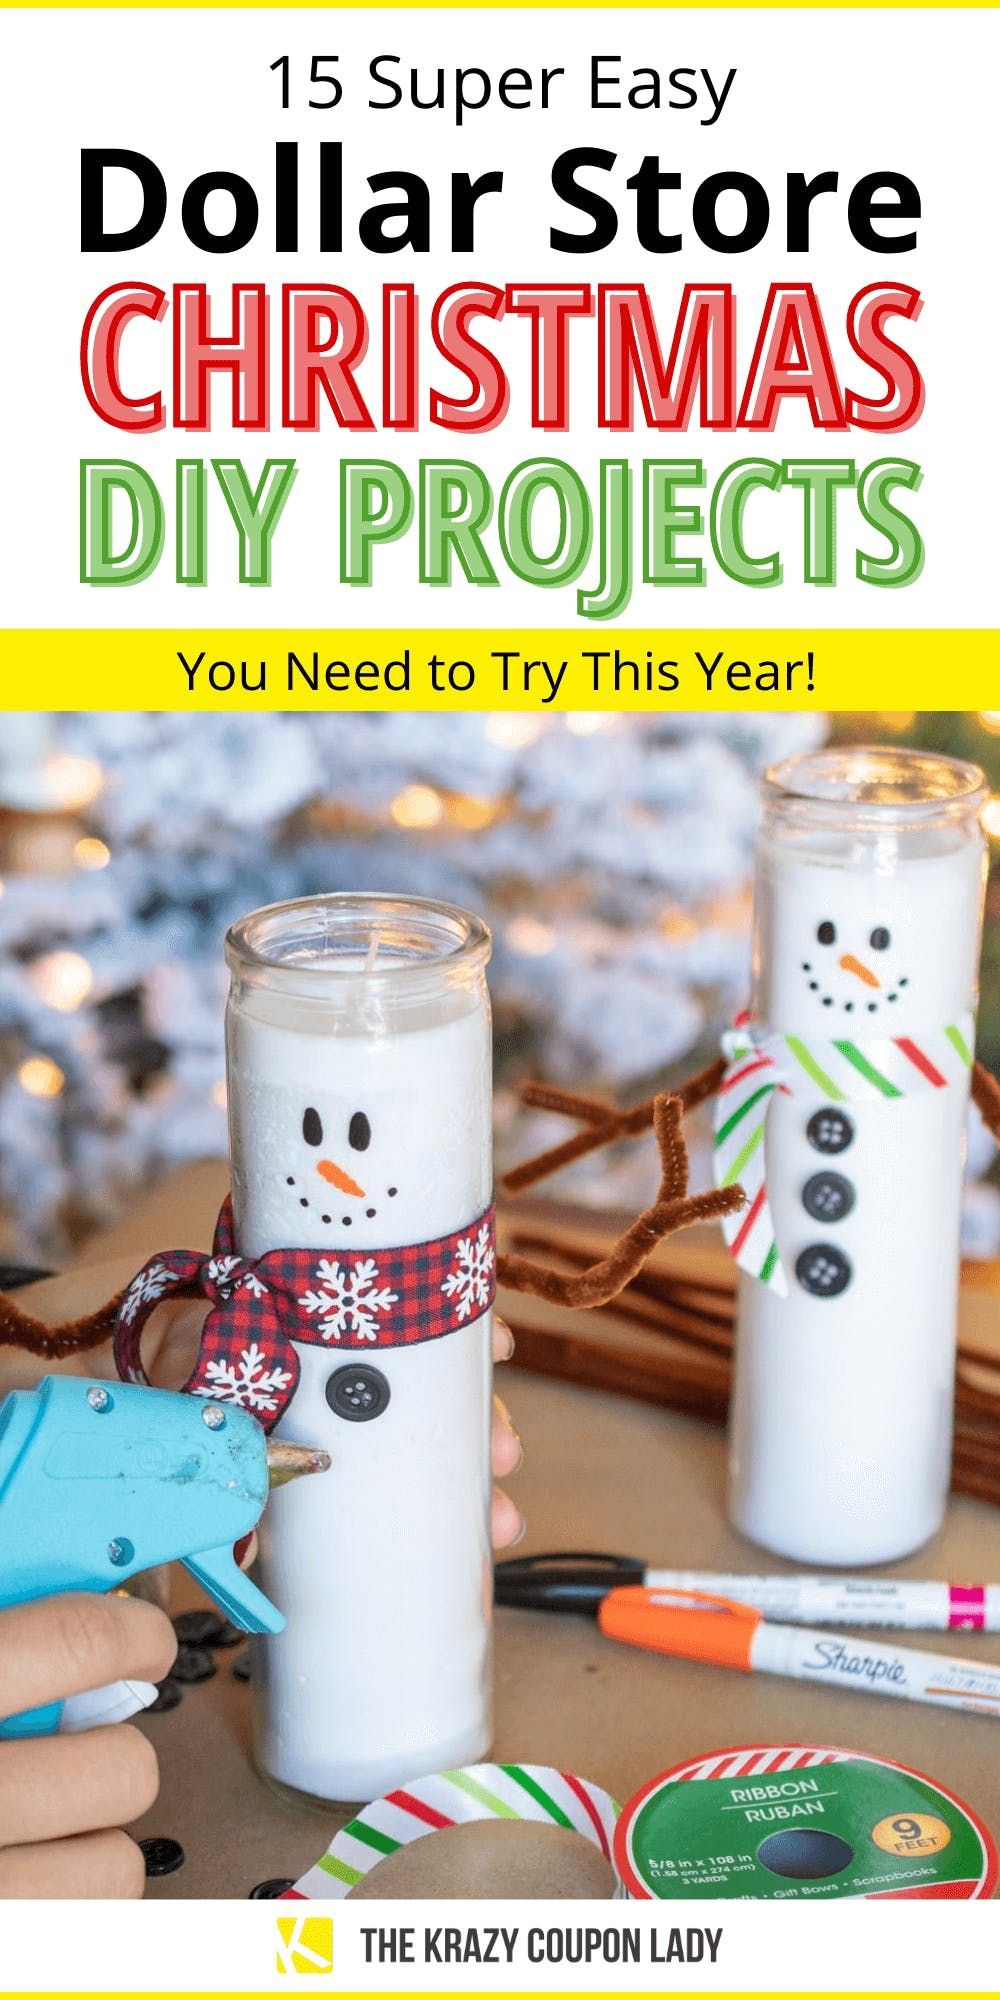 15 Dollar Store Christmas DIY Projects Anyone Can Do -   23 diy christmas decorations dollar store ideas